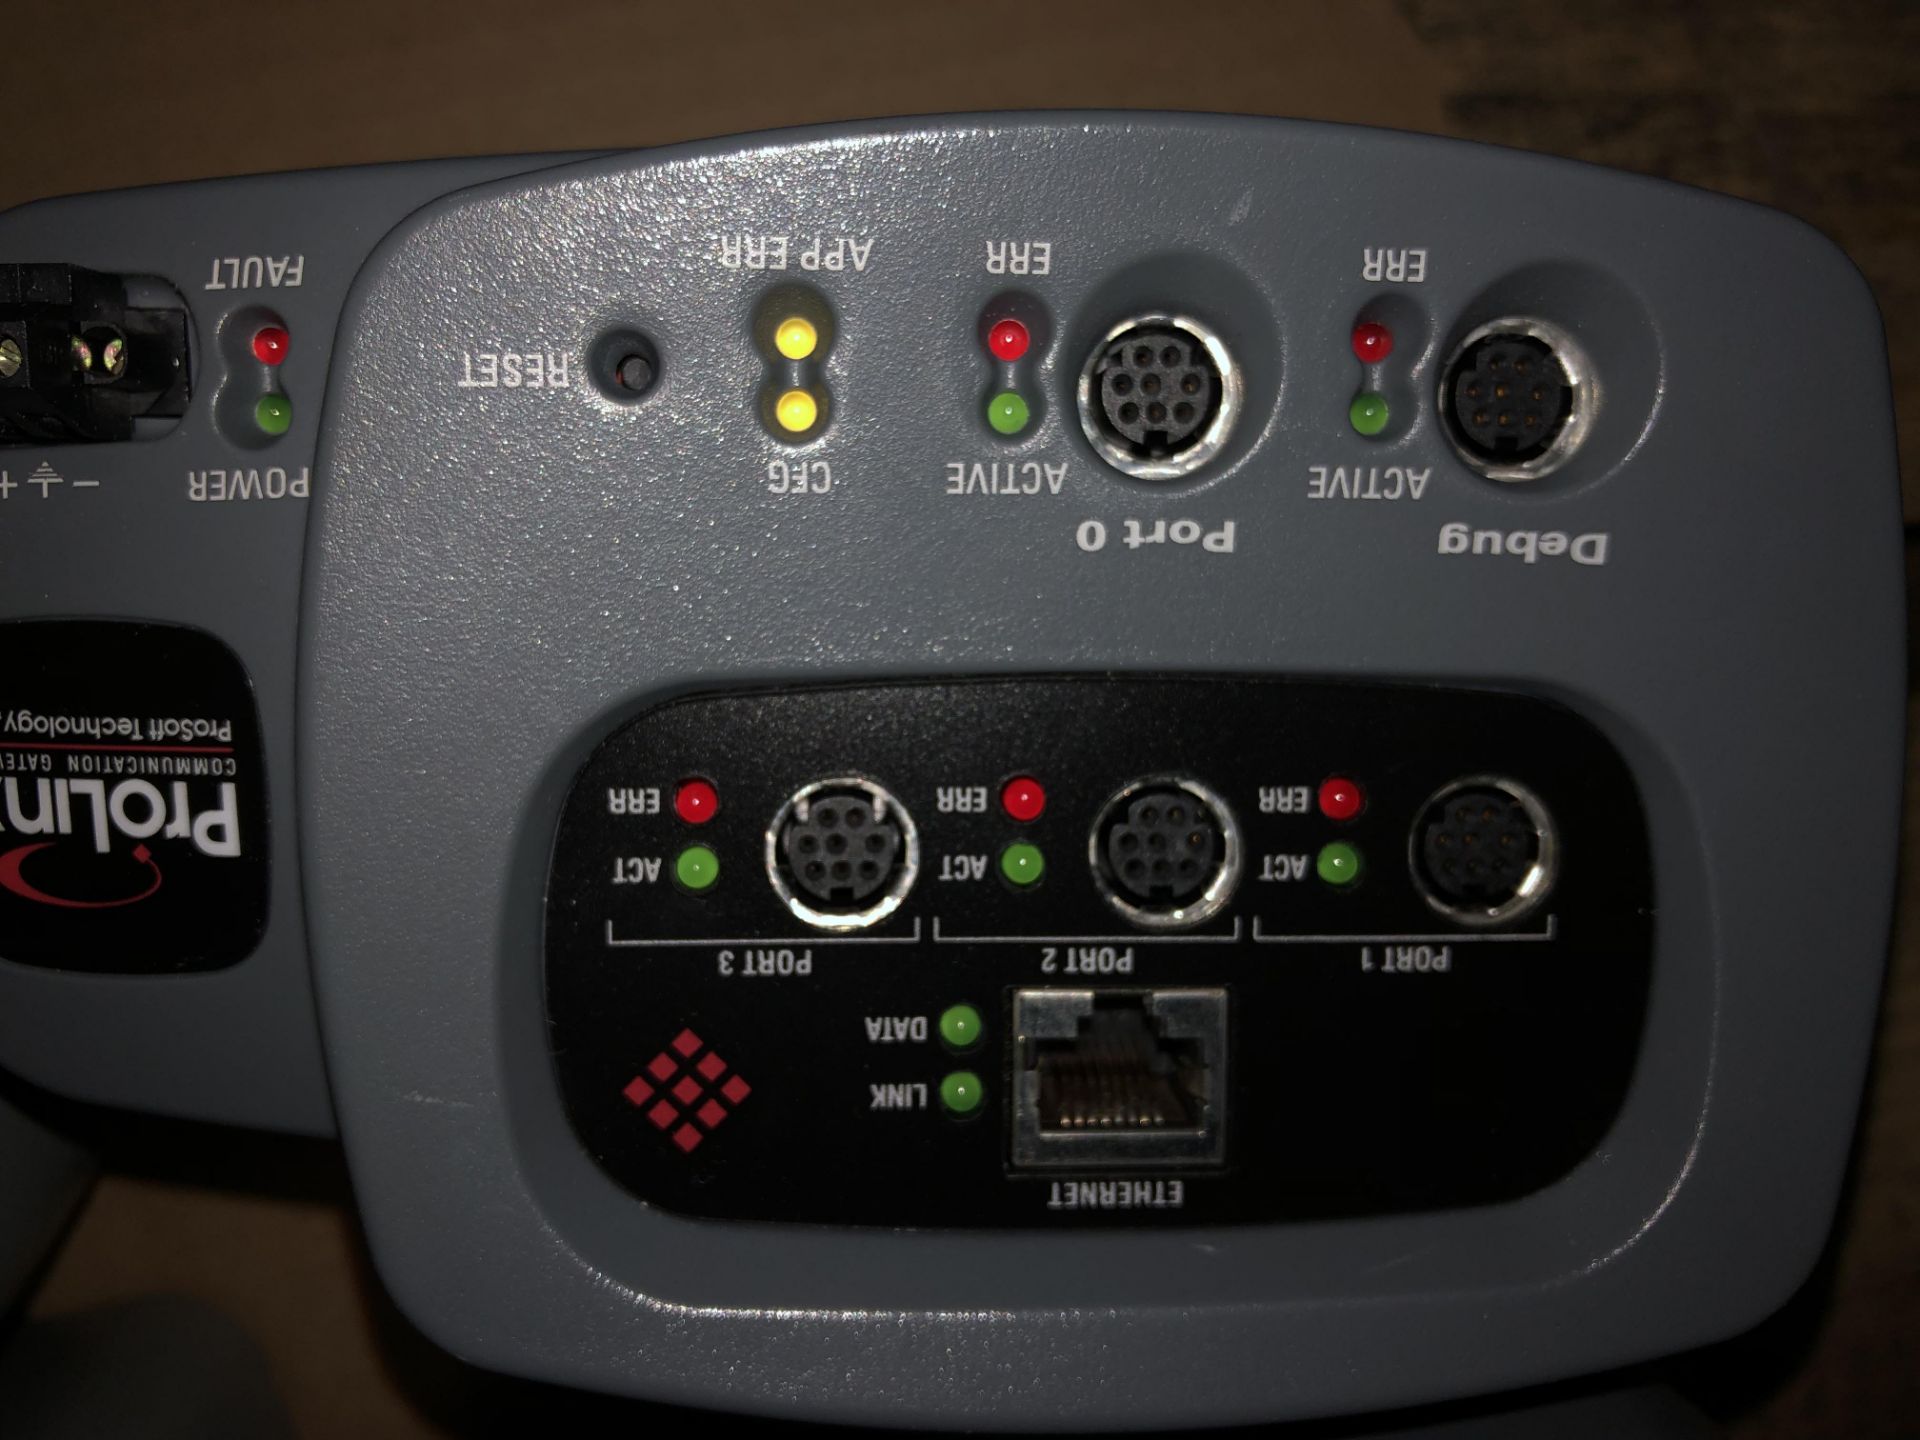 LOT OF MISC CONTROLS INCLUDING ARISTA MICROBOX AND PROLINE RIGGING/LOADING FEE - $50 - Image 4 of 4